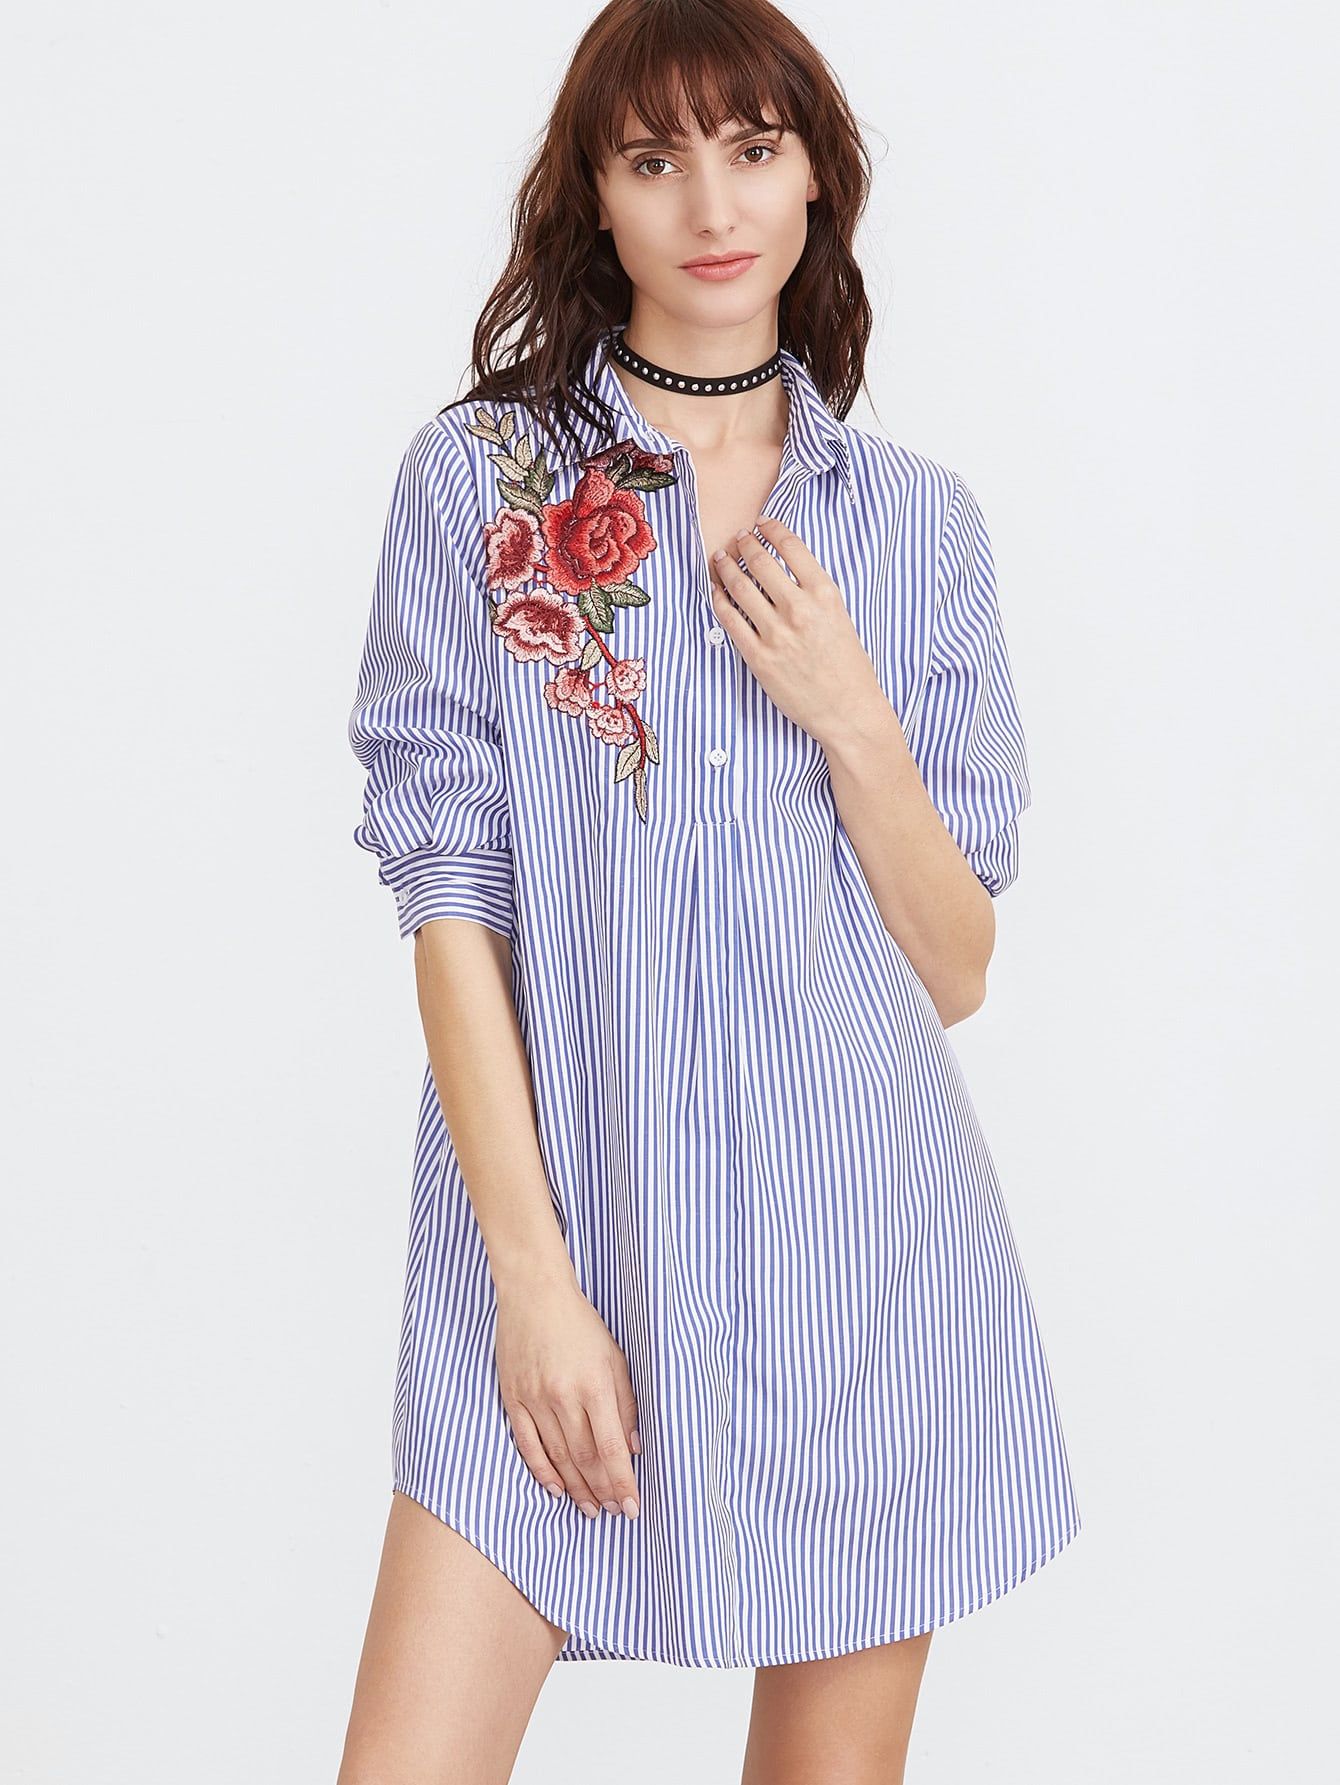 Blue And White Striped Embroidered Rose Applique Shirt Dress | SHEIN